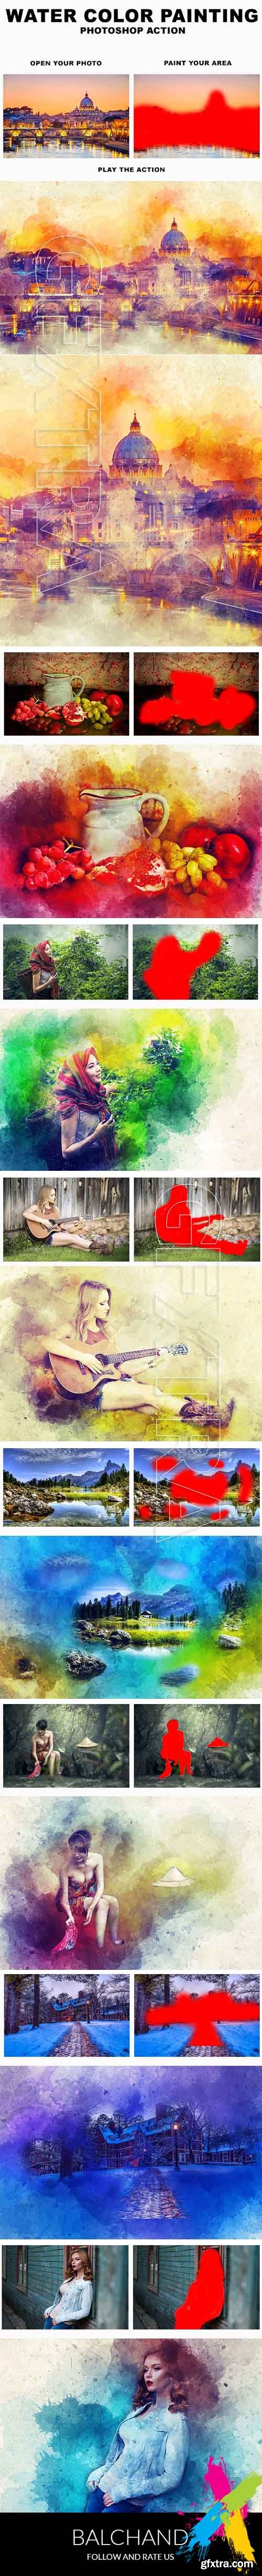 Graphicriver - Water Color Painting Photoshop Action 20258661